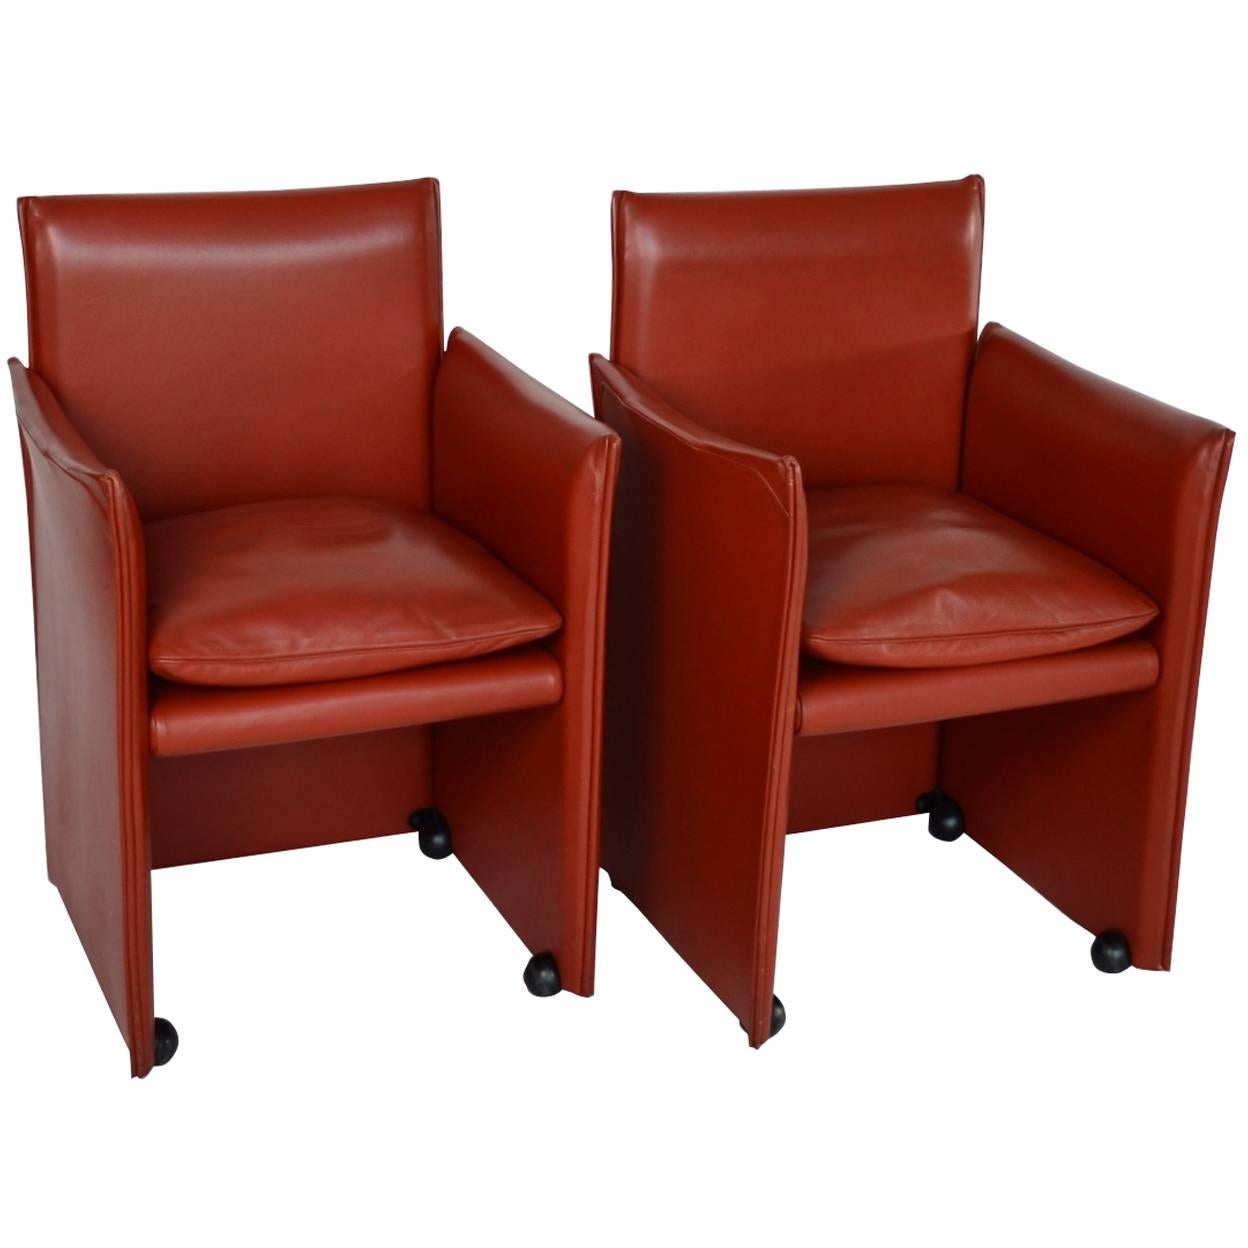 Pair of Mario Bellini Lounge Chairs for Cassina, Italy, Labeled